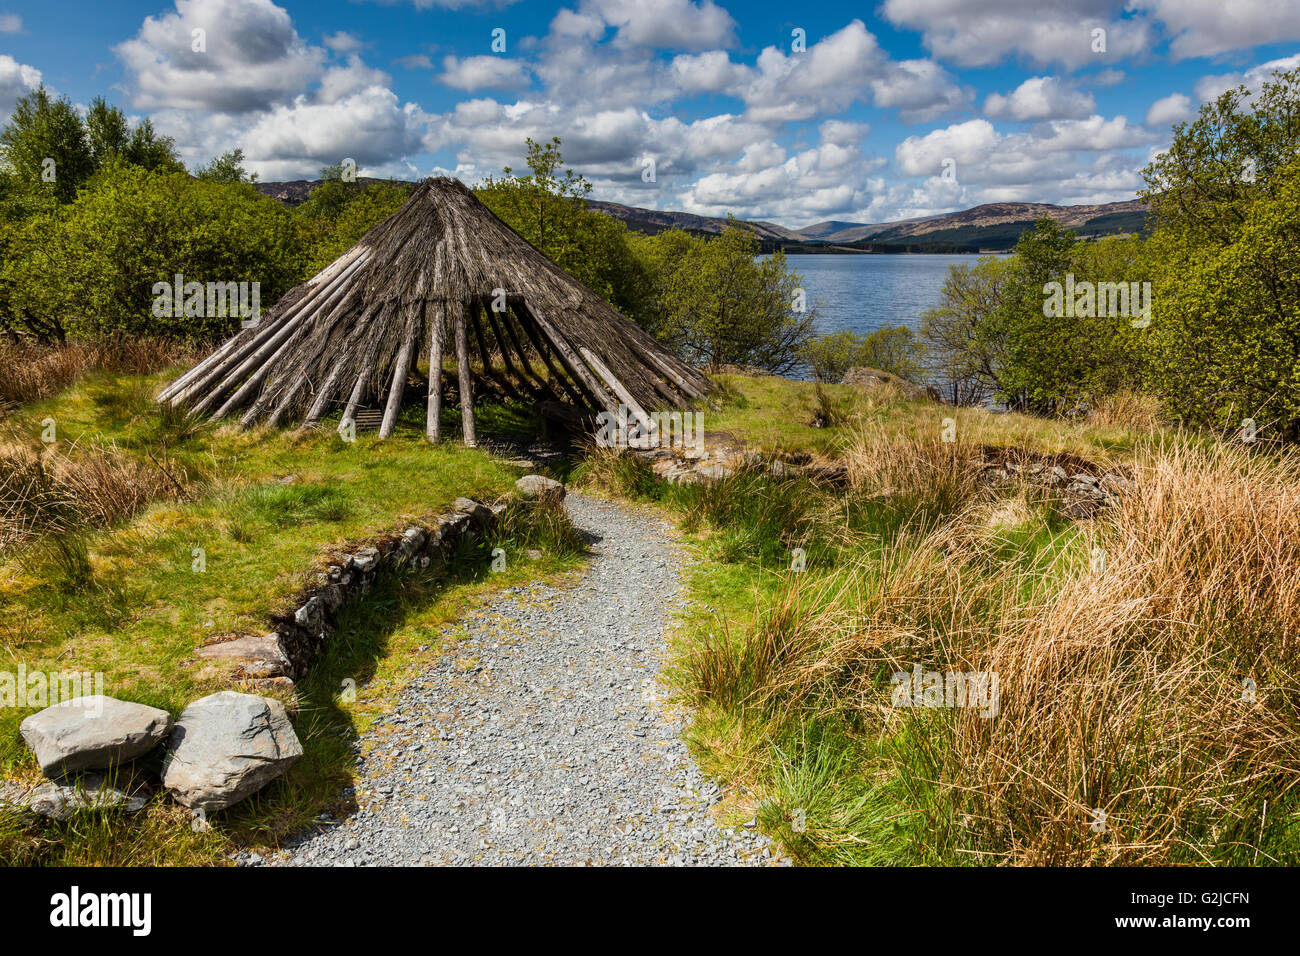 Basic shelter beside Clatteringshaws Loch, Galloway Forest Park, Dumfries and Galloway, Scotland Stock Photo